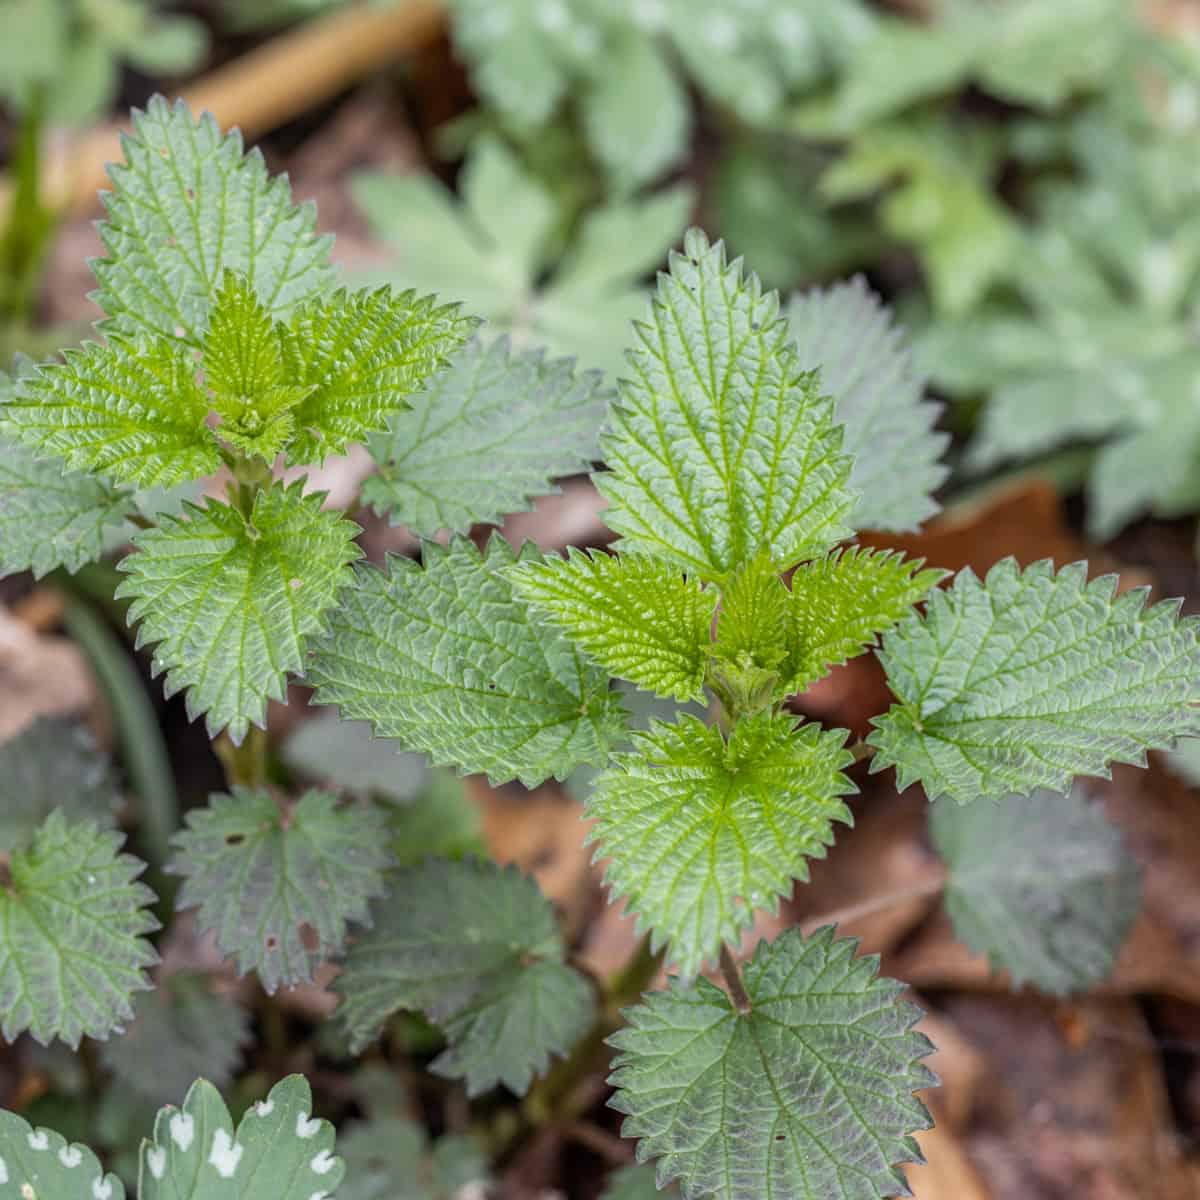 Young, common stinging nettles outside